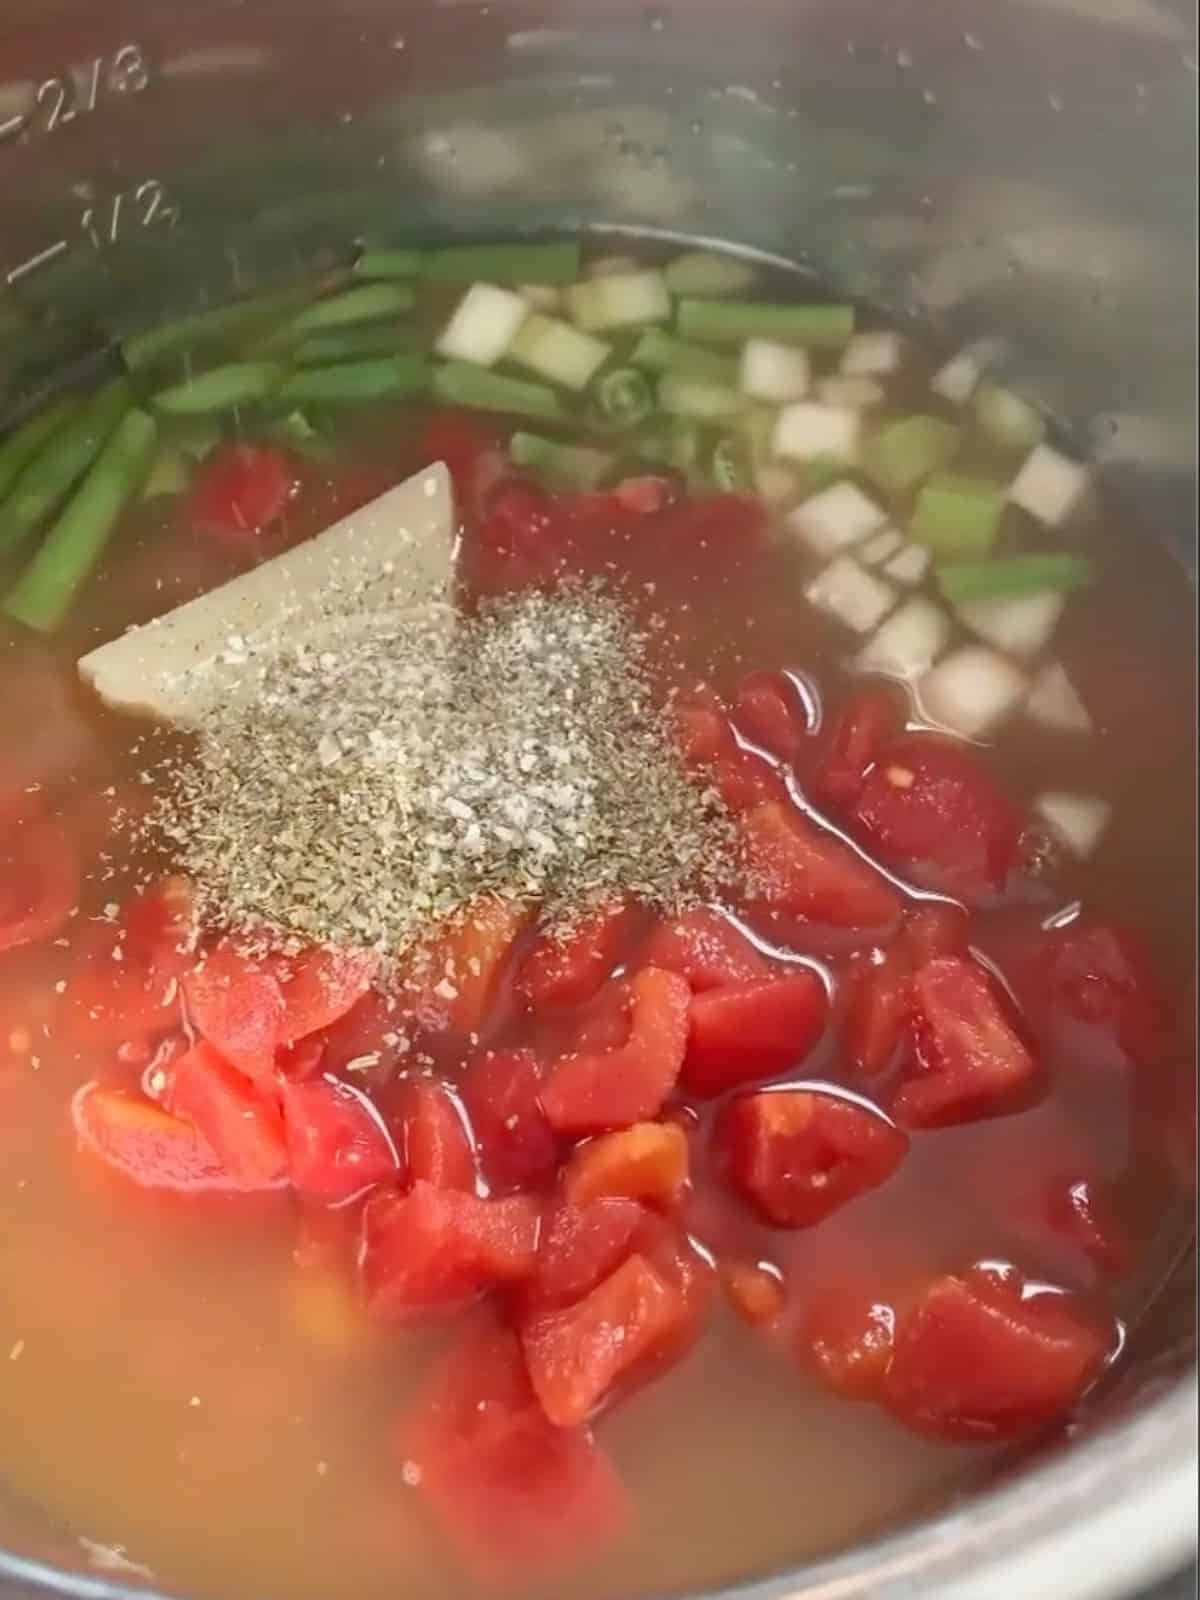 The broth, veggies and soup seasonings in the instant pot.